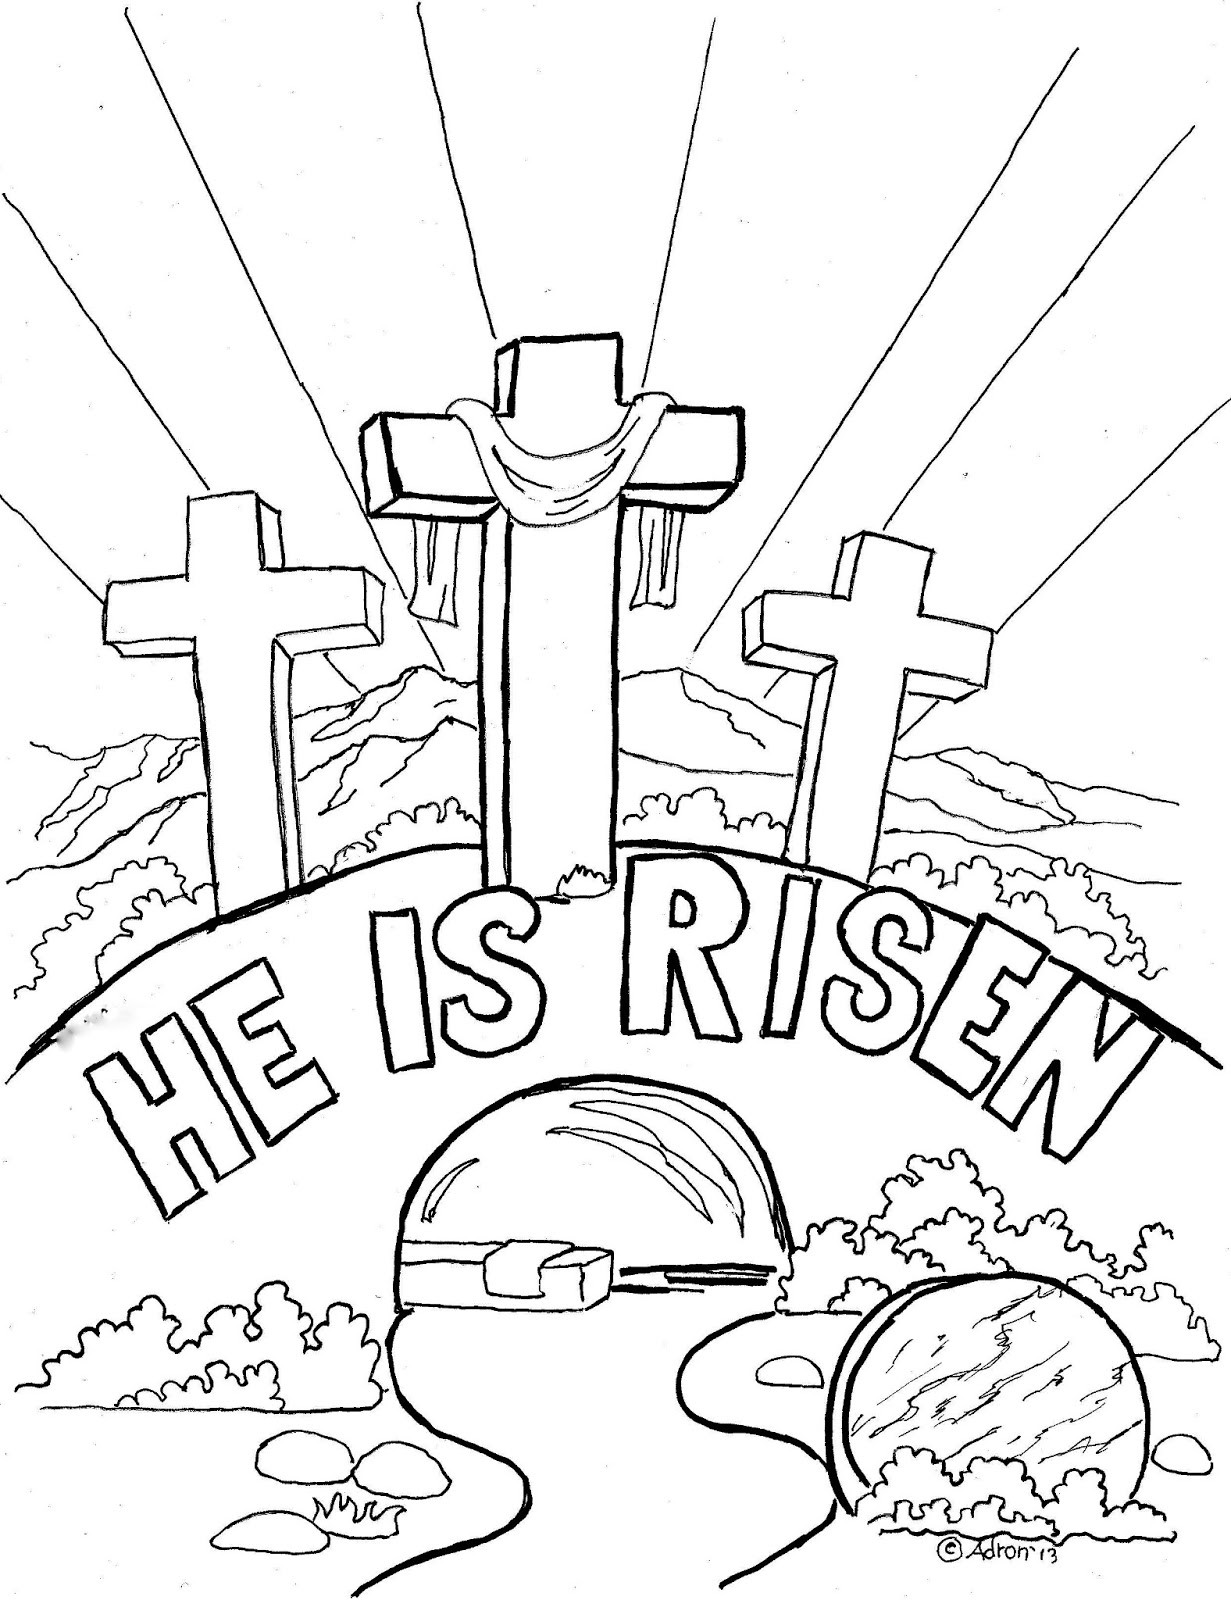 Easter Bible Coloring Pages For Toddlers
 Kids coloring page from What s in the Bible showing the